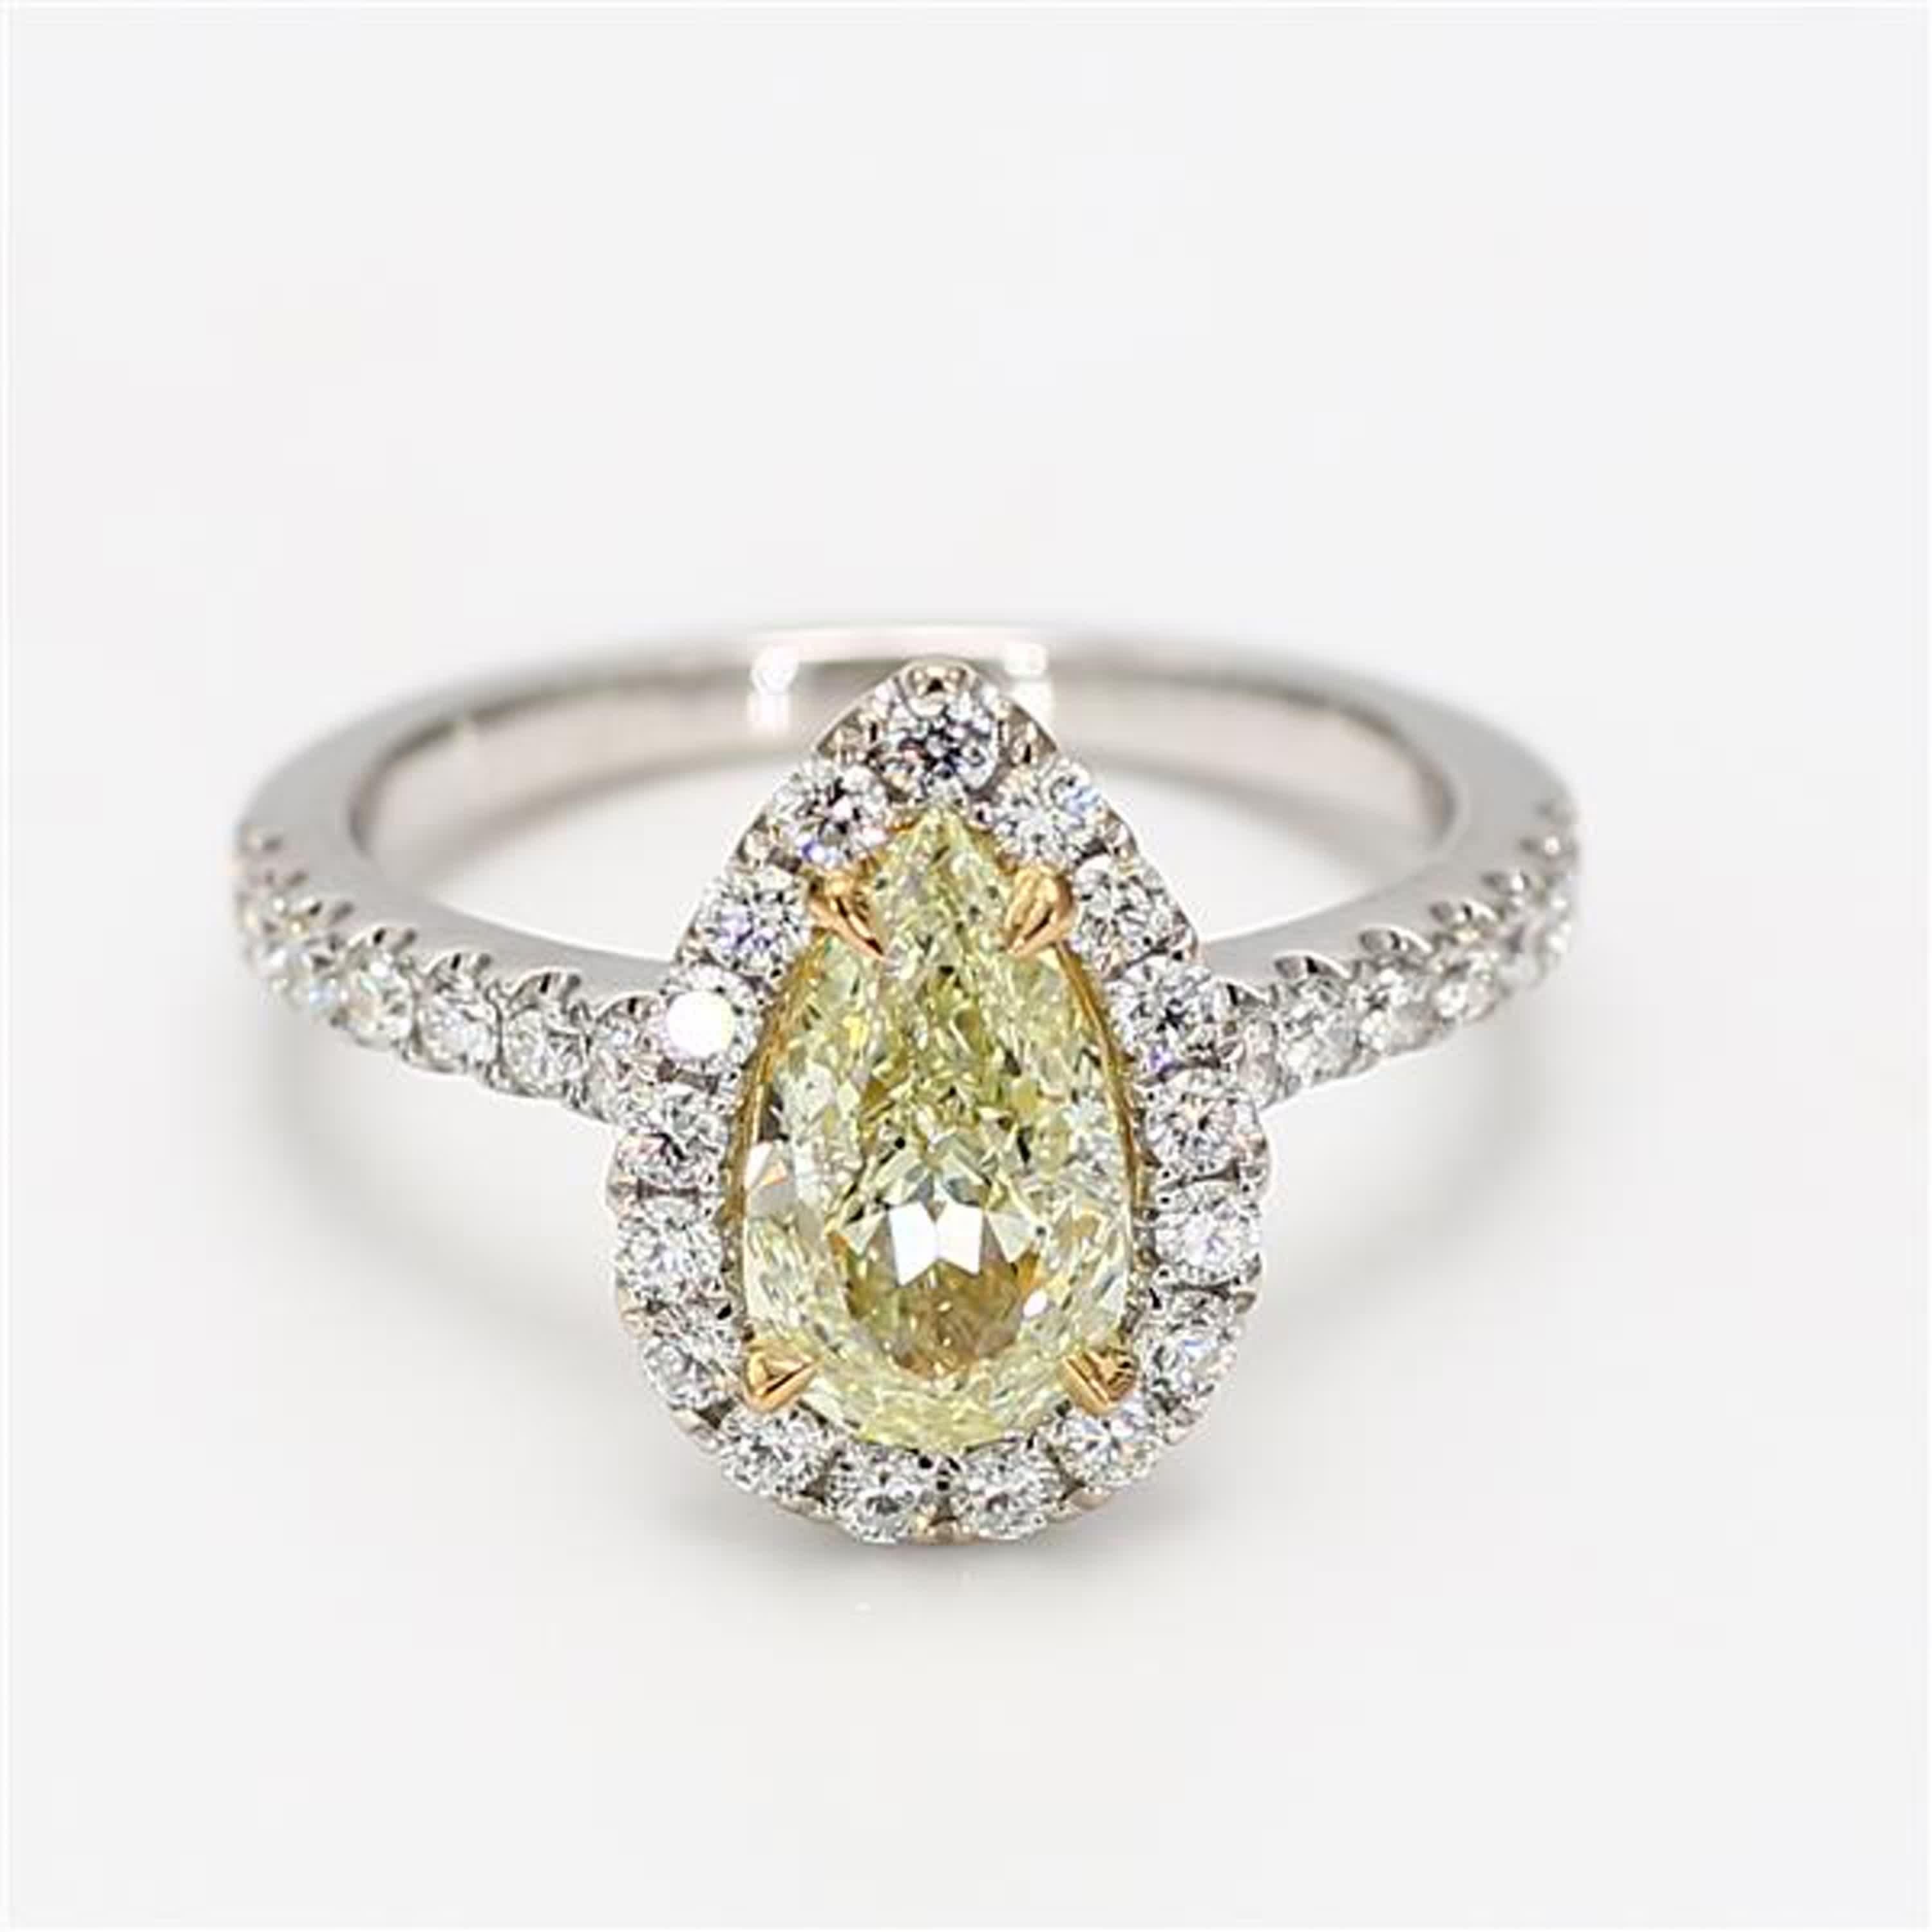 RareGemWorld's classic diamond ring. Mounted in a beautiful 18K Yellow and White Gold setting with a natural pear cut yellow diamond. The yellow diamond is surrounded by round natural white diamond melee. This ring is guaranteed to impress and